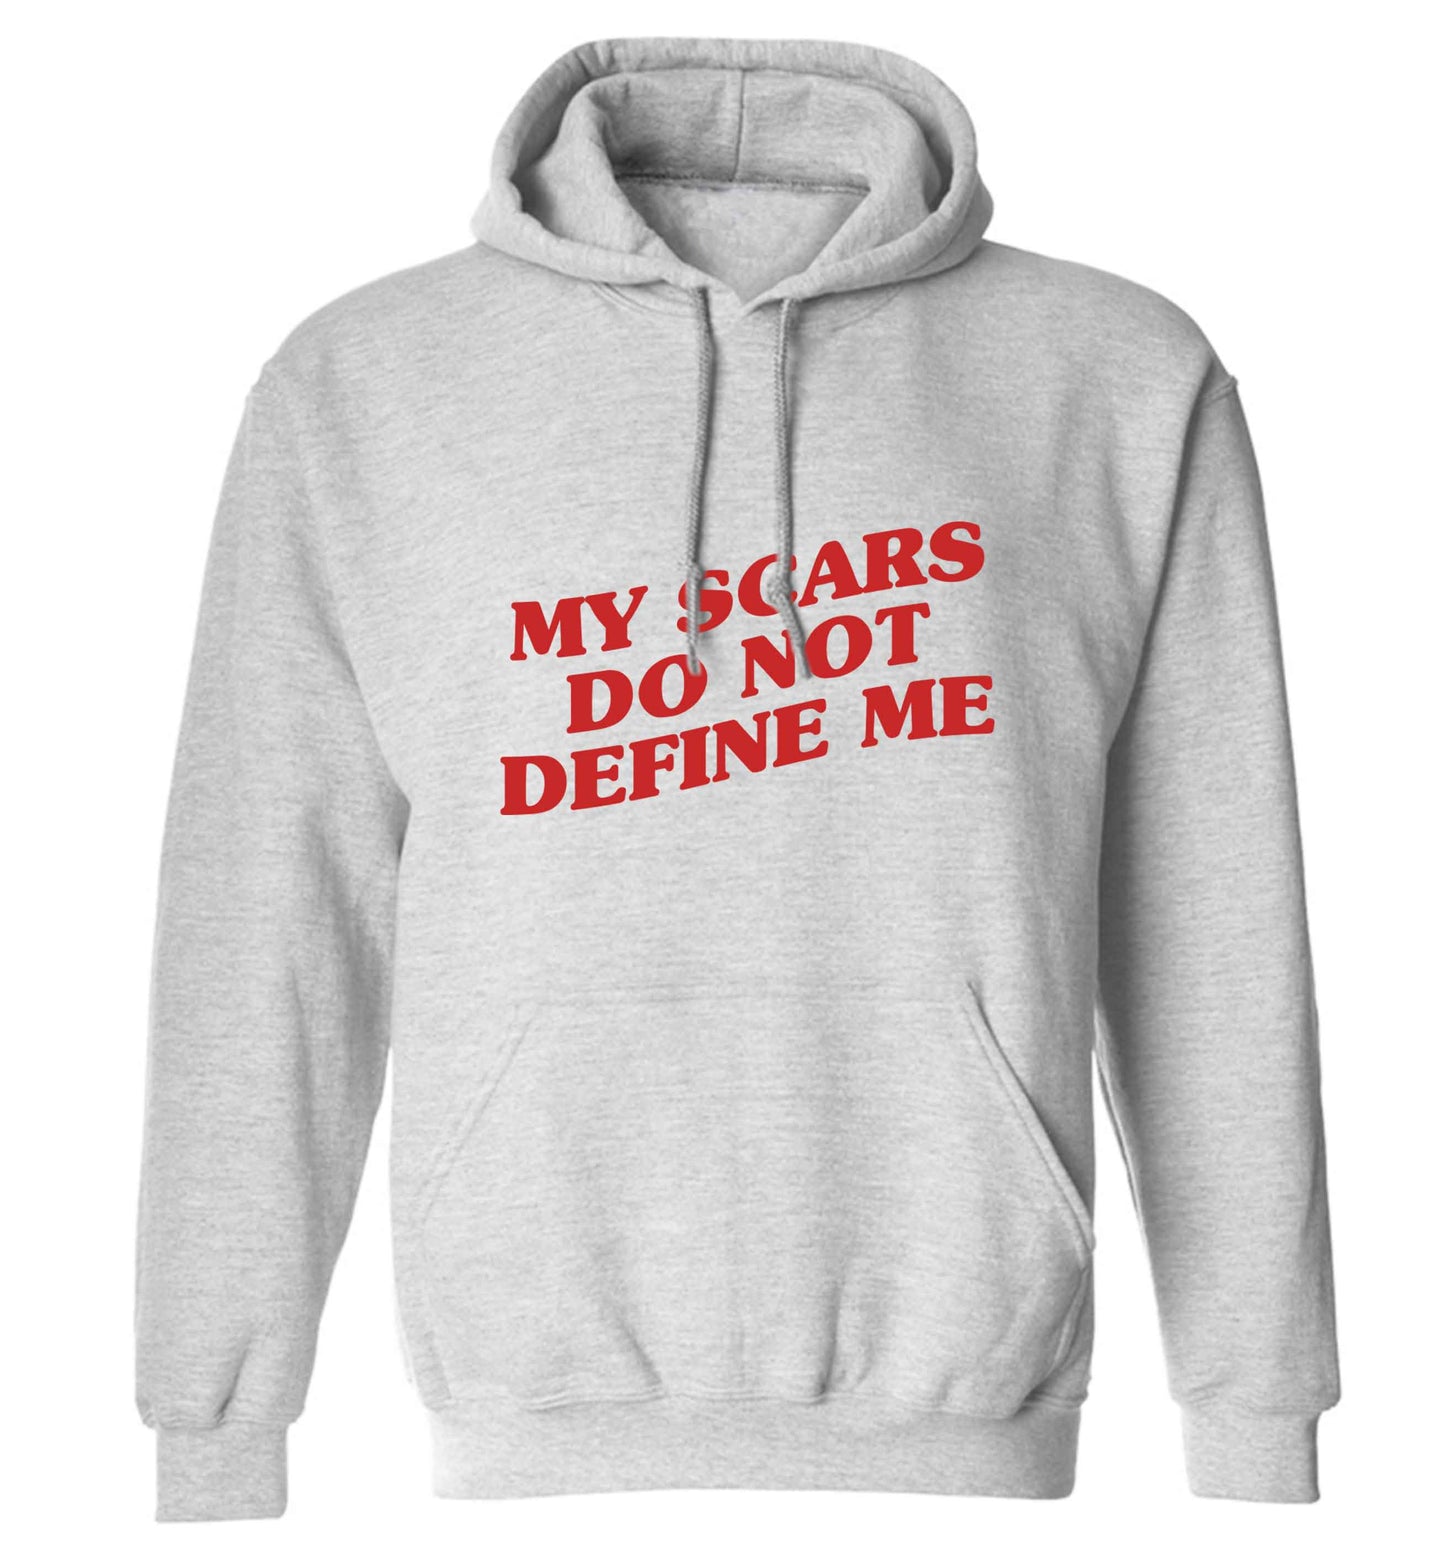 My scars do not define me adults unisex grey hoodie 2XL